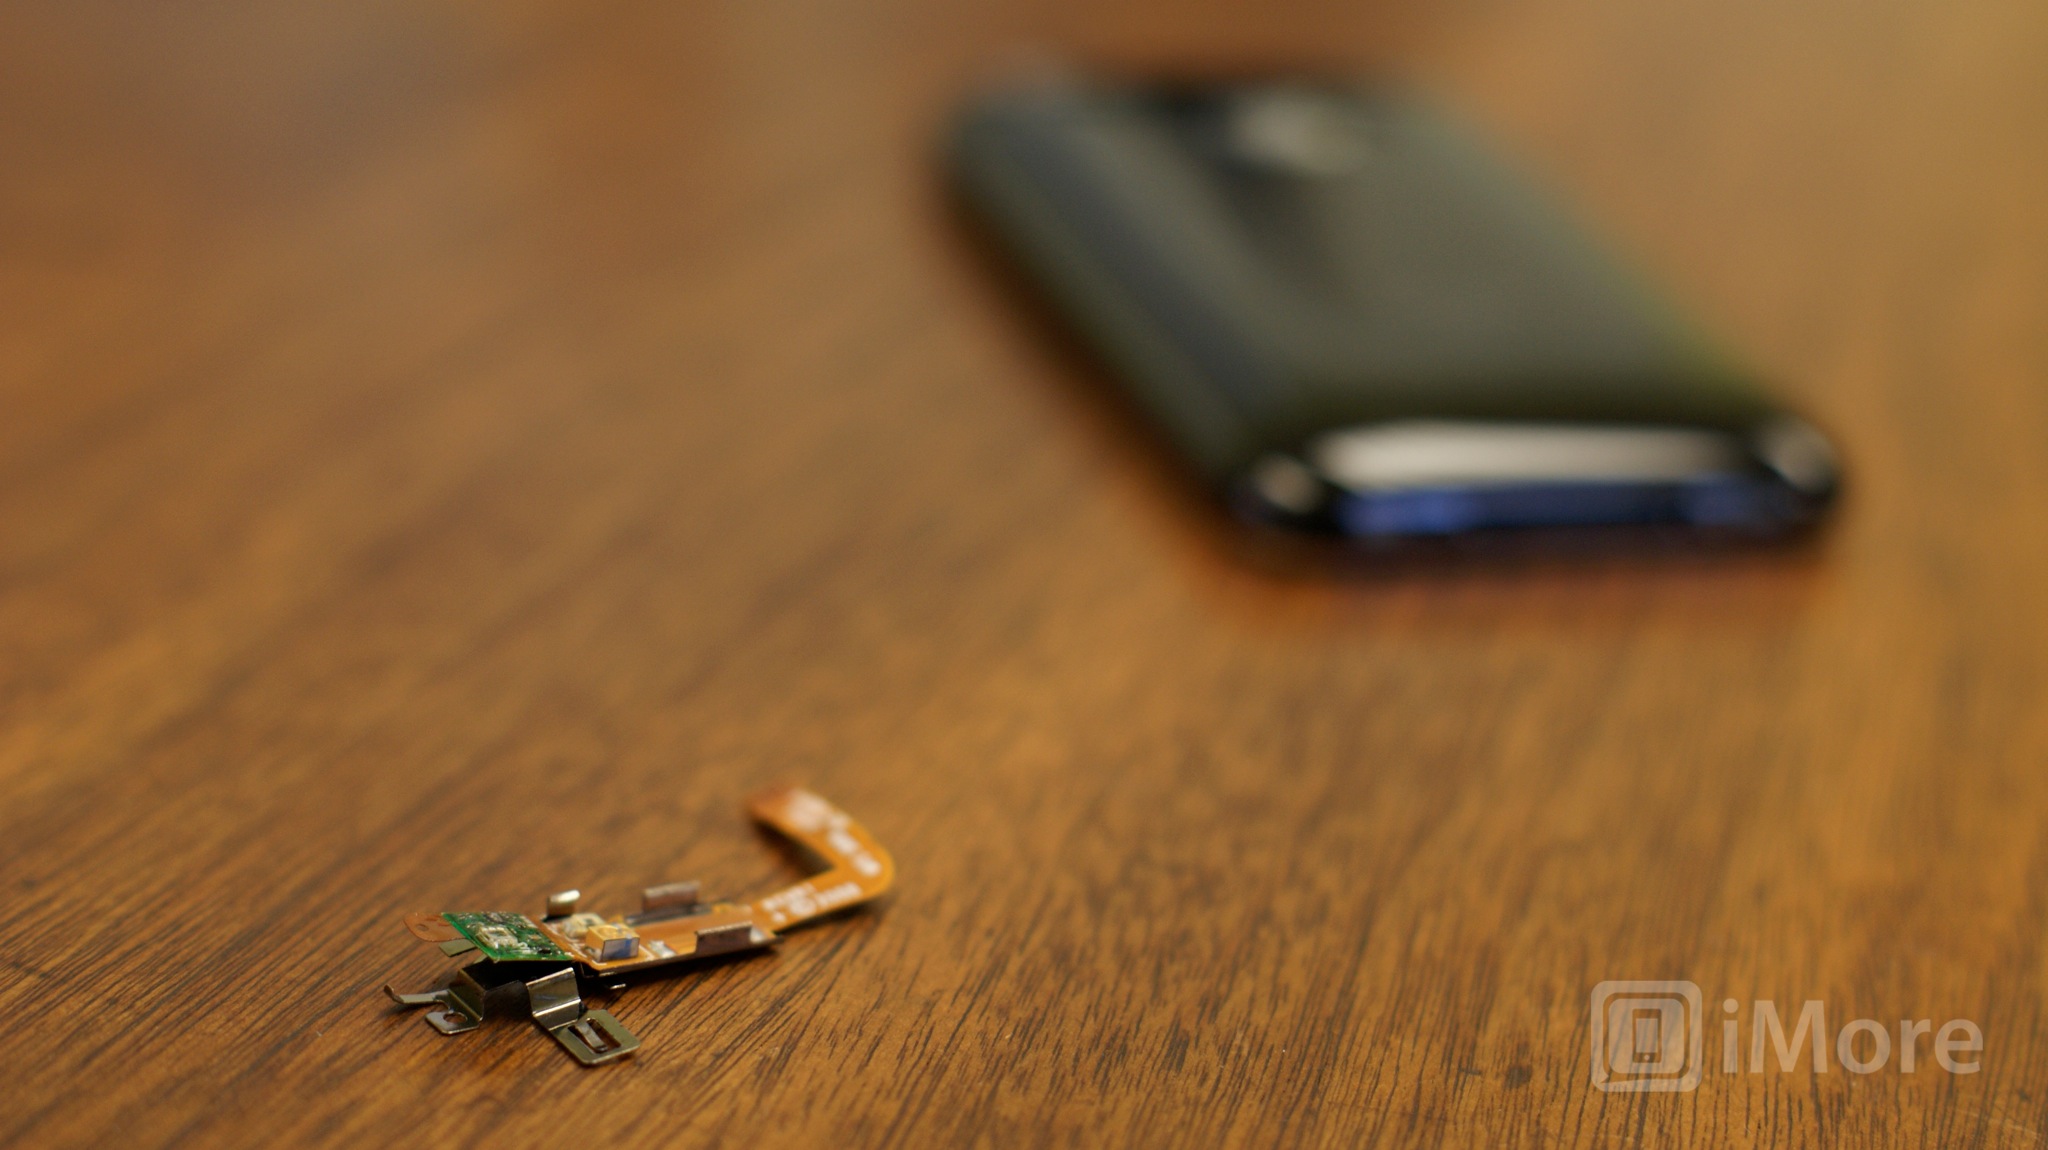 How to replace an iPhone 3G 3GS proximity sensor cable